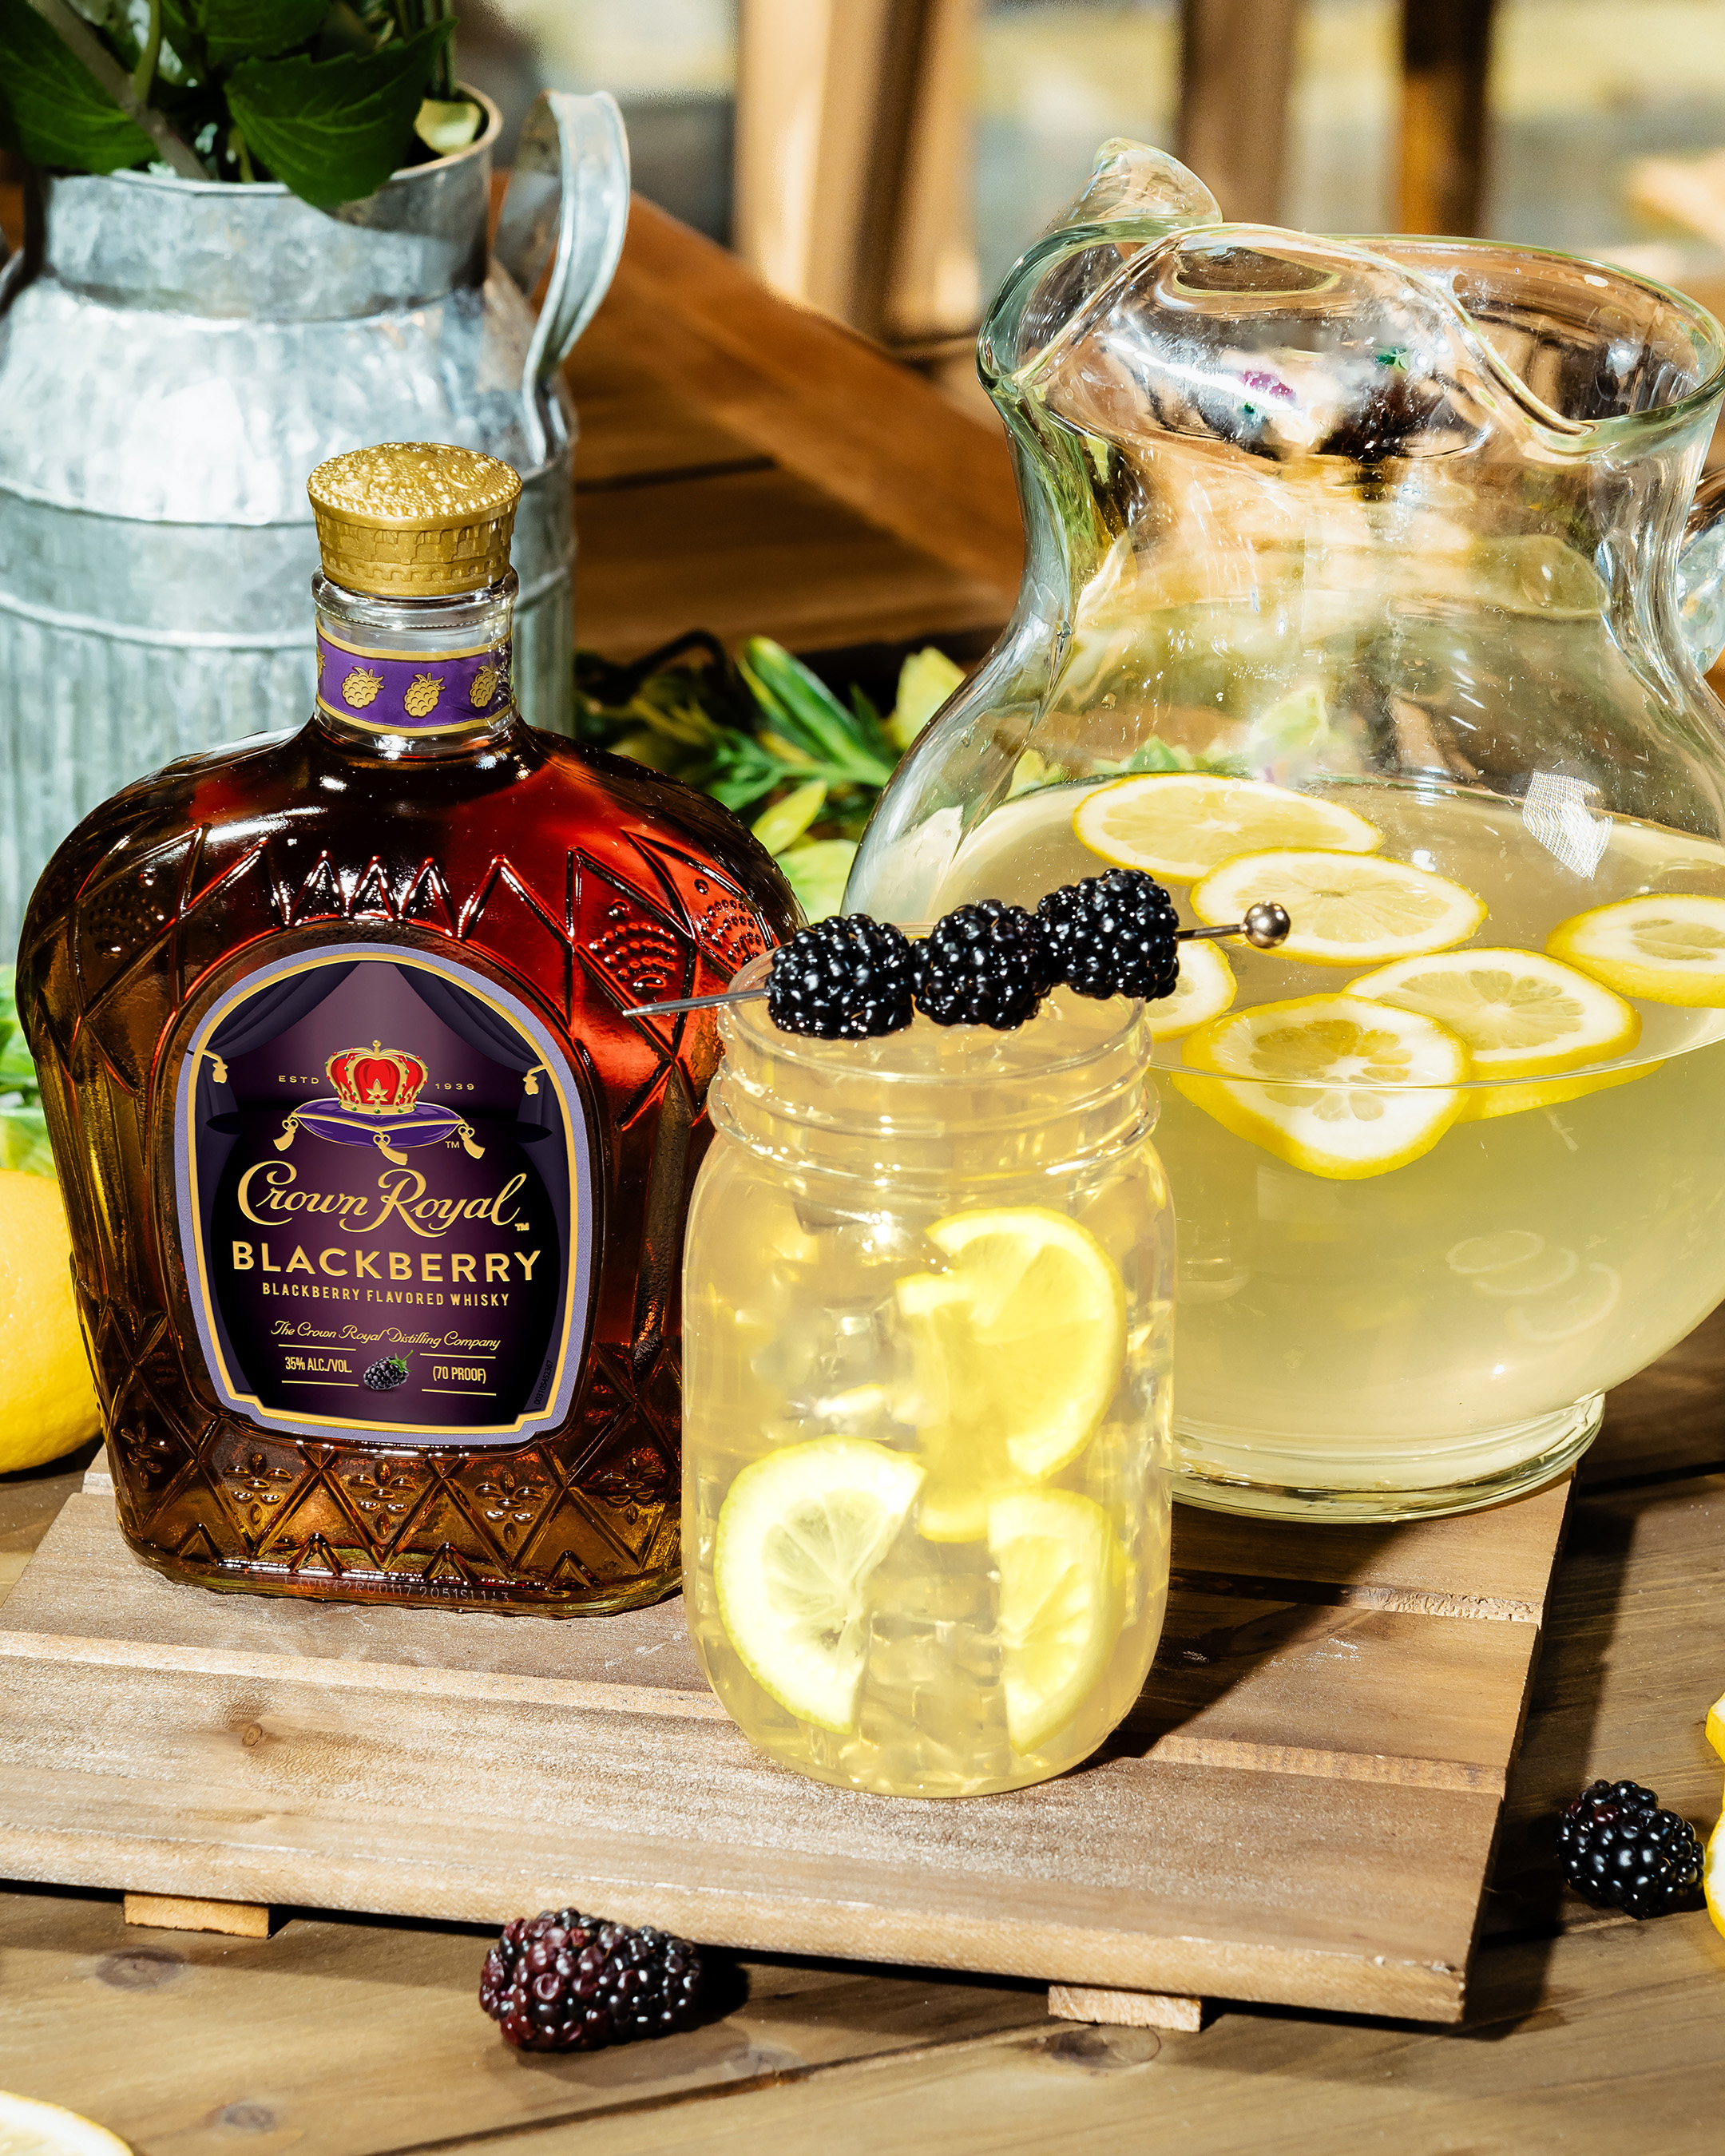 CROWN ROYAL LAUNCHES HIGHLY ANTICIPATED FLAVOR INNOVATION CROWN ROYAL BLACKBERRY FLAVORED WHISKY